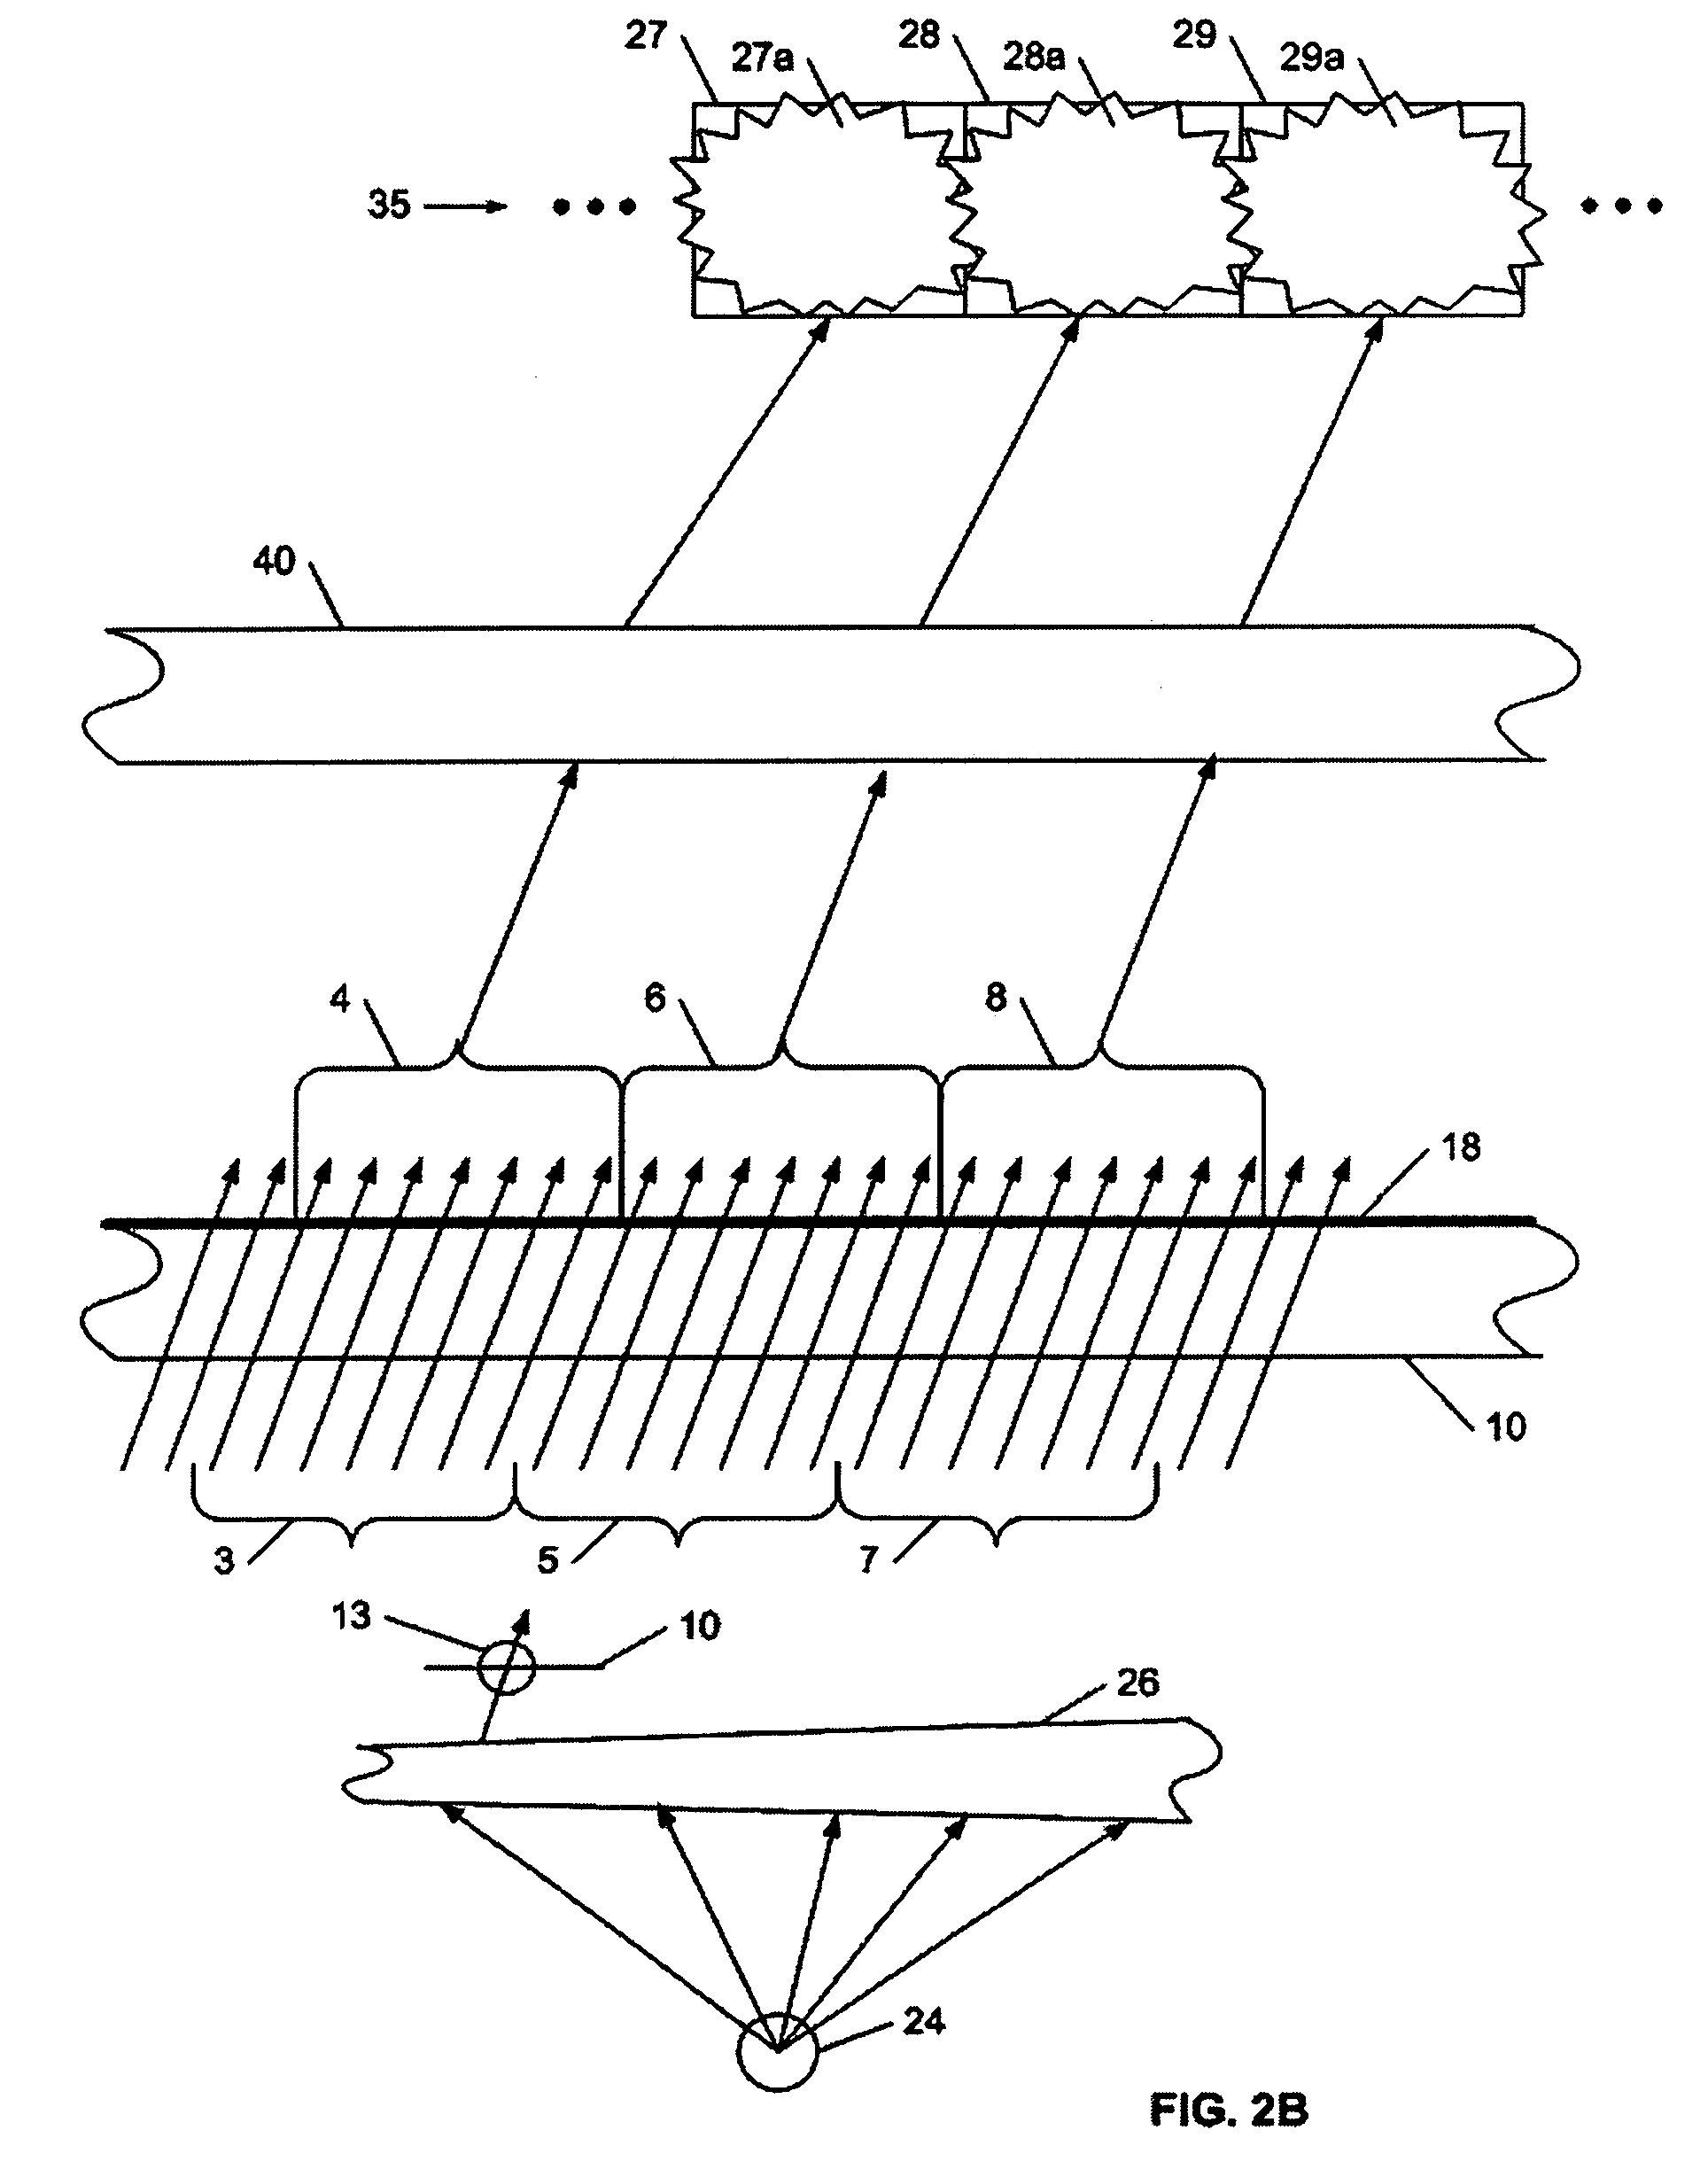 Illumination system for material inspection